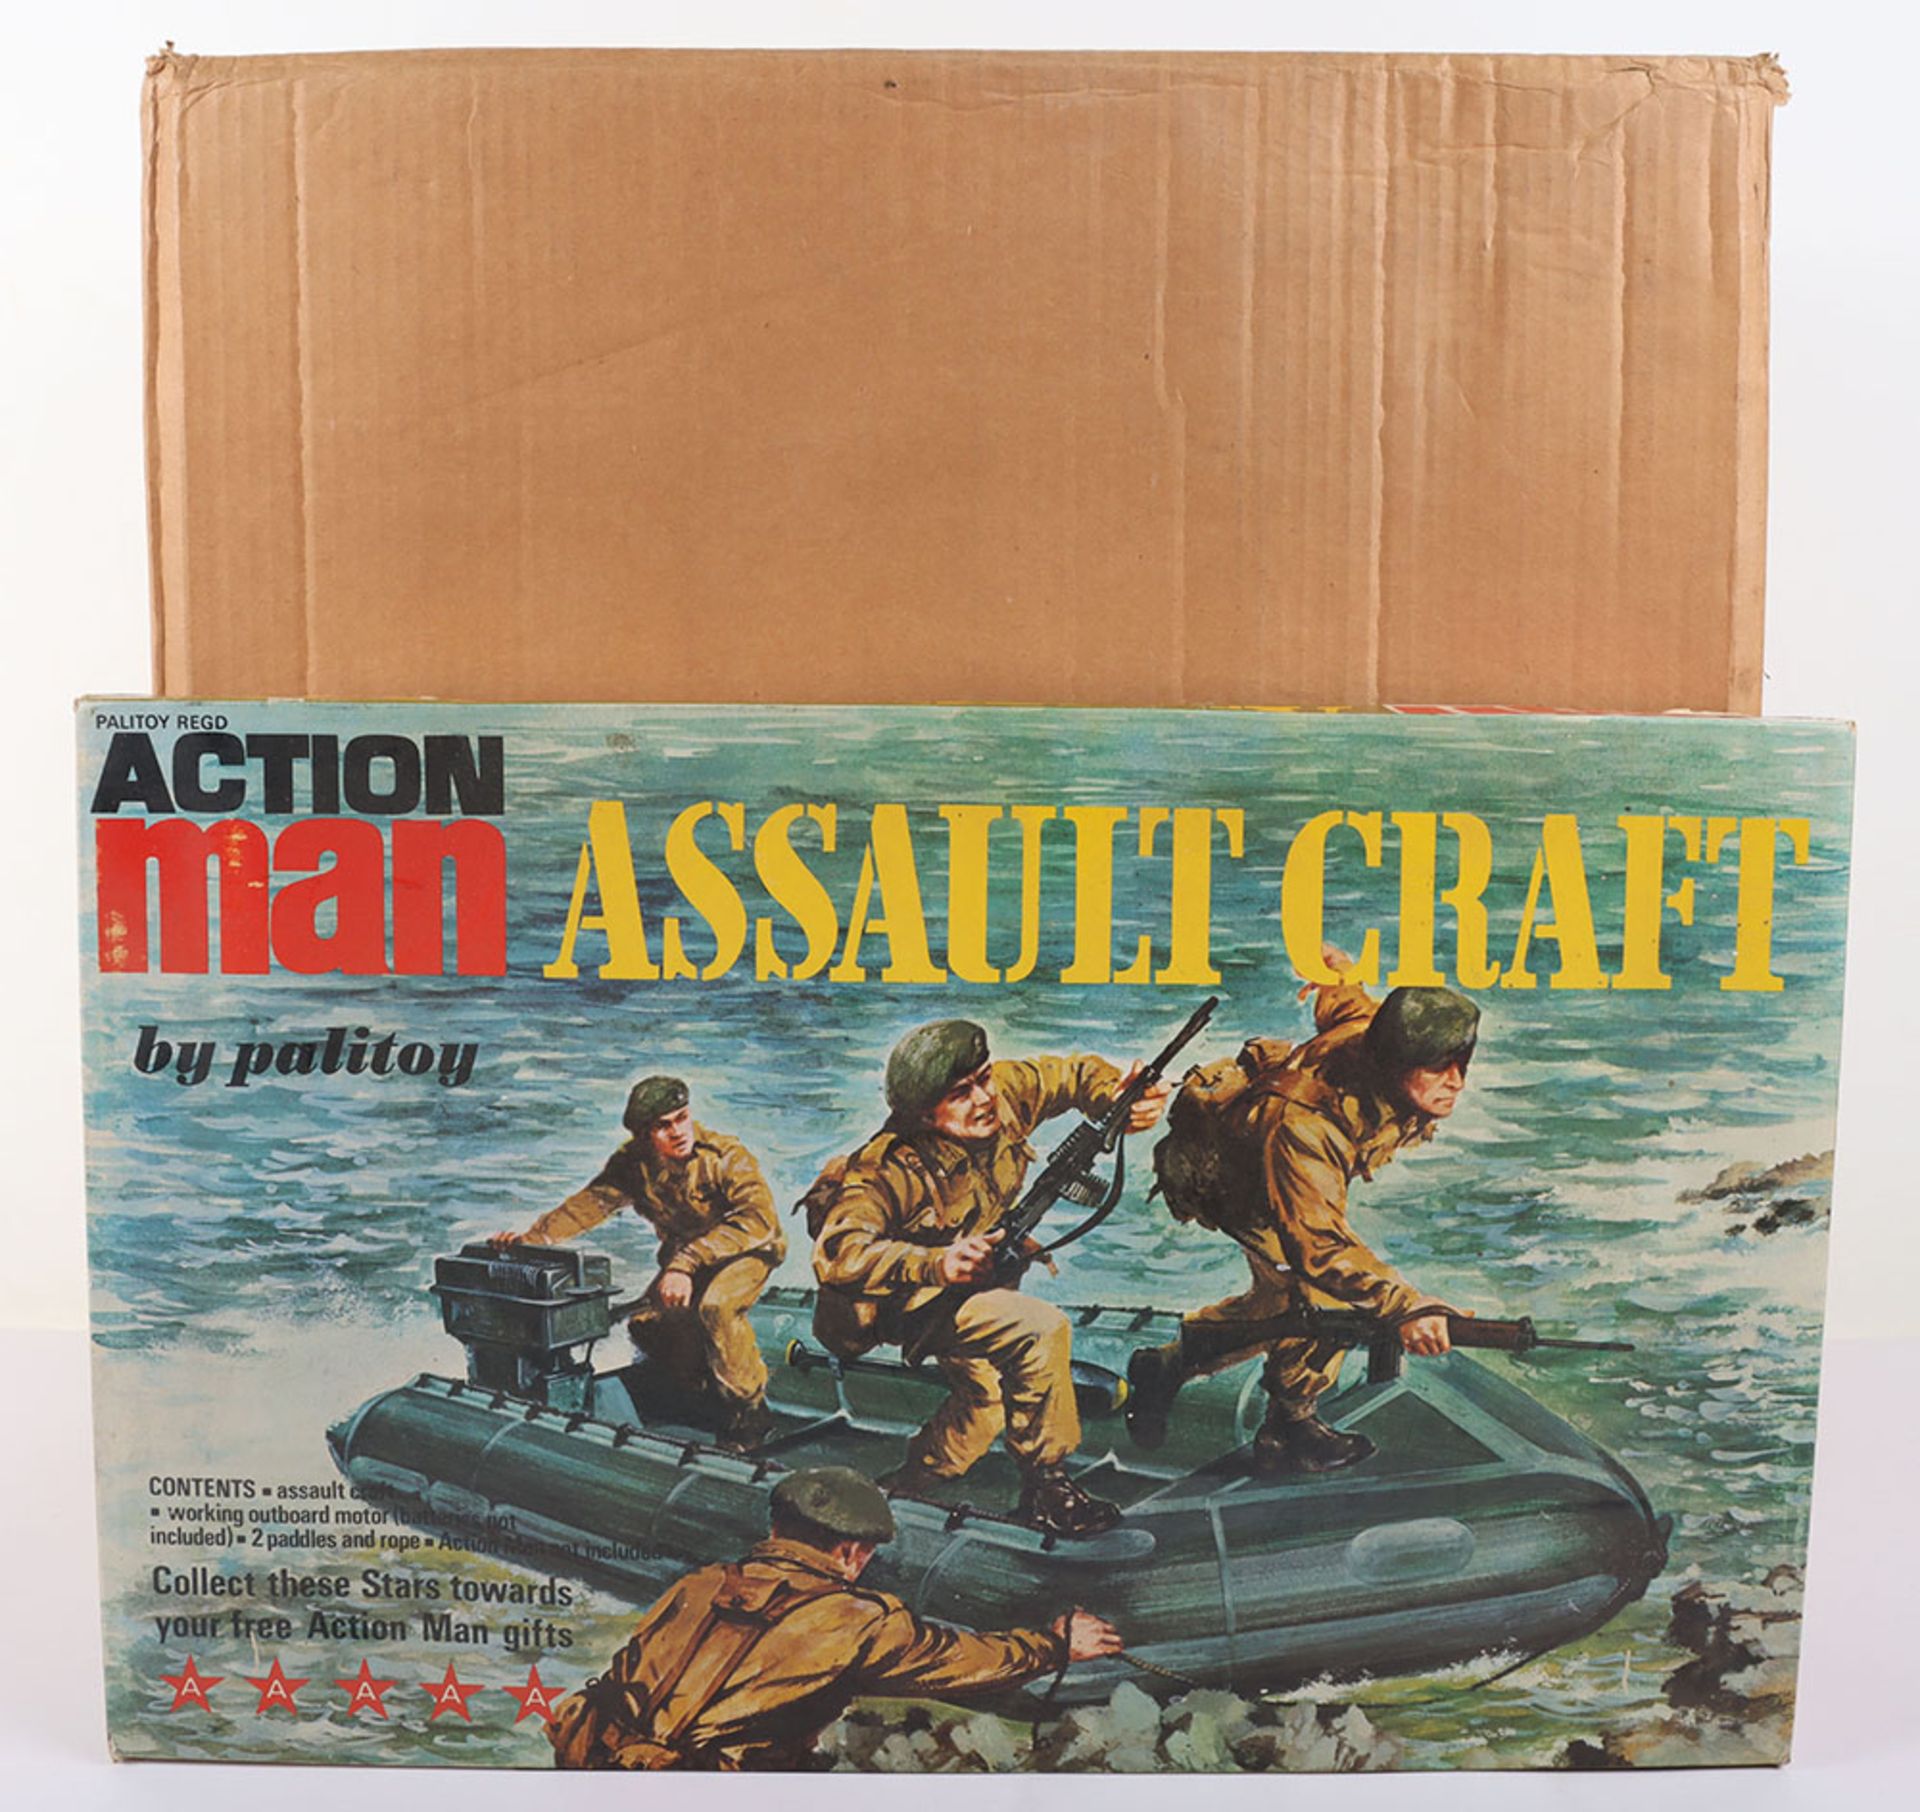 Scarce Palitoy Action Man Trade Box of Assault Crafts - Image 2 of 8